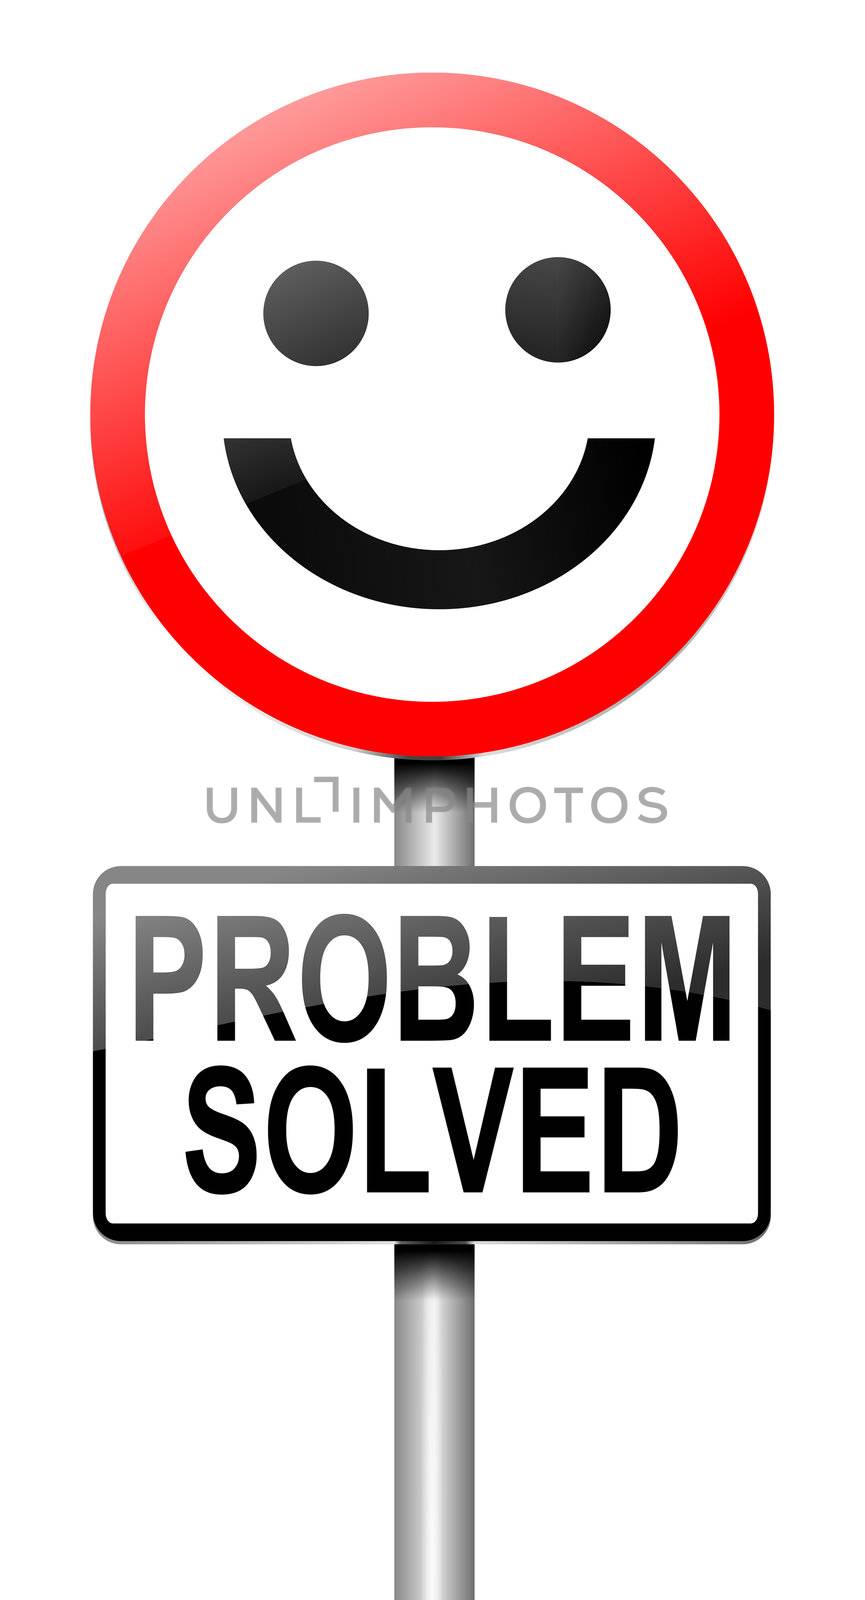 Illustration depicting a roadsign with 'a problem shared' concept. White background.